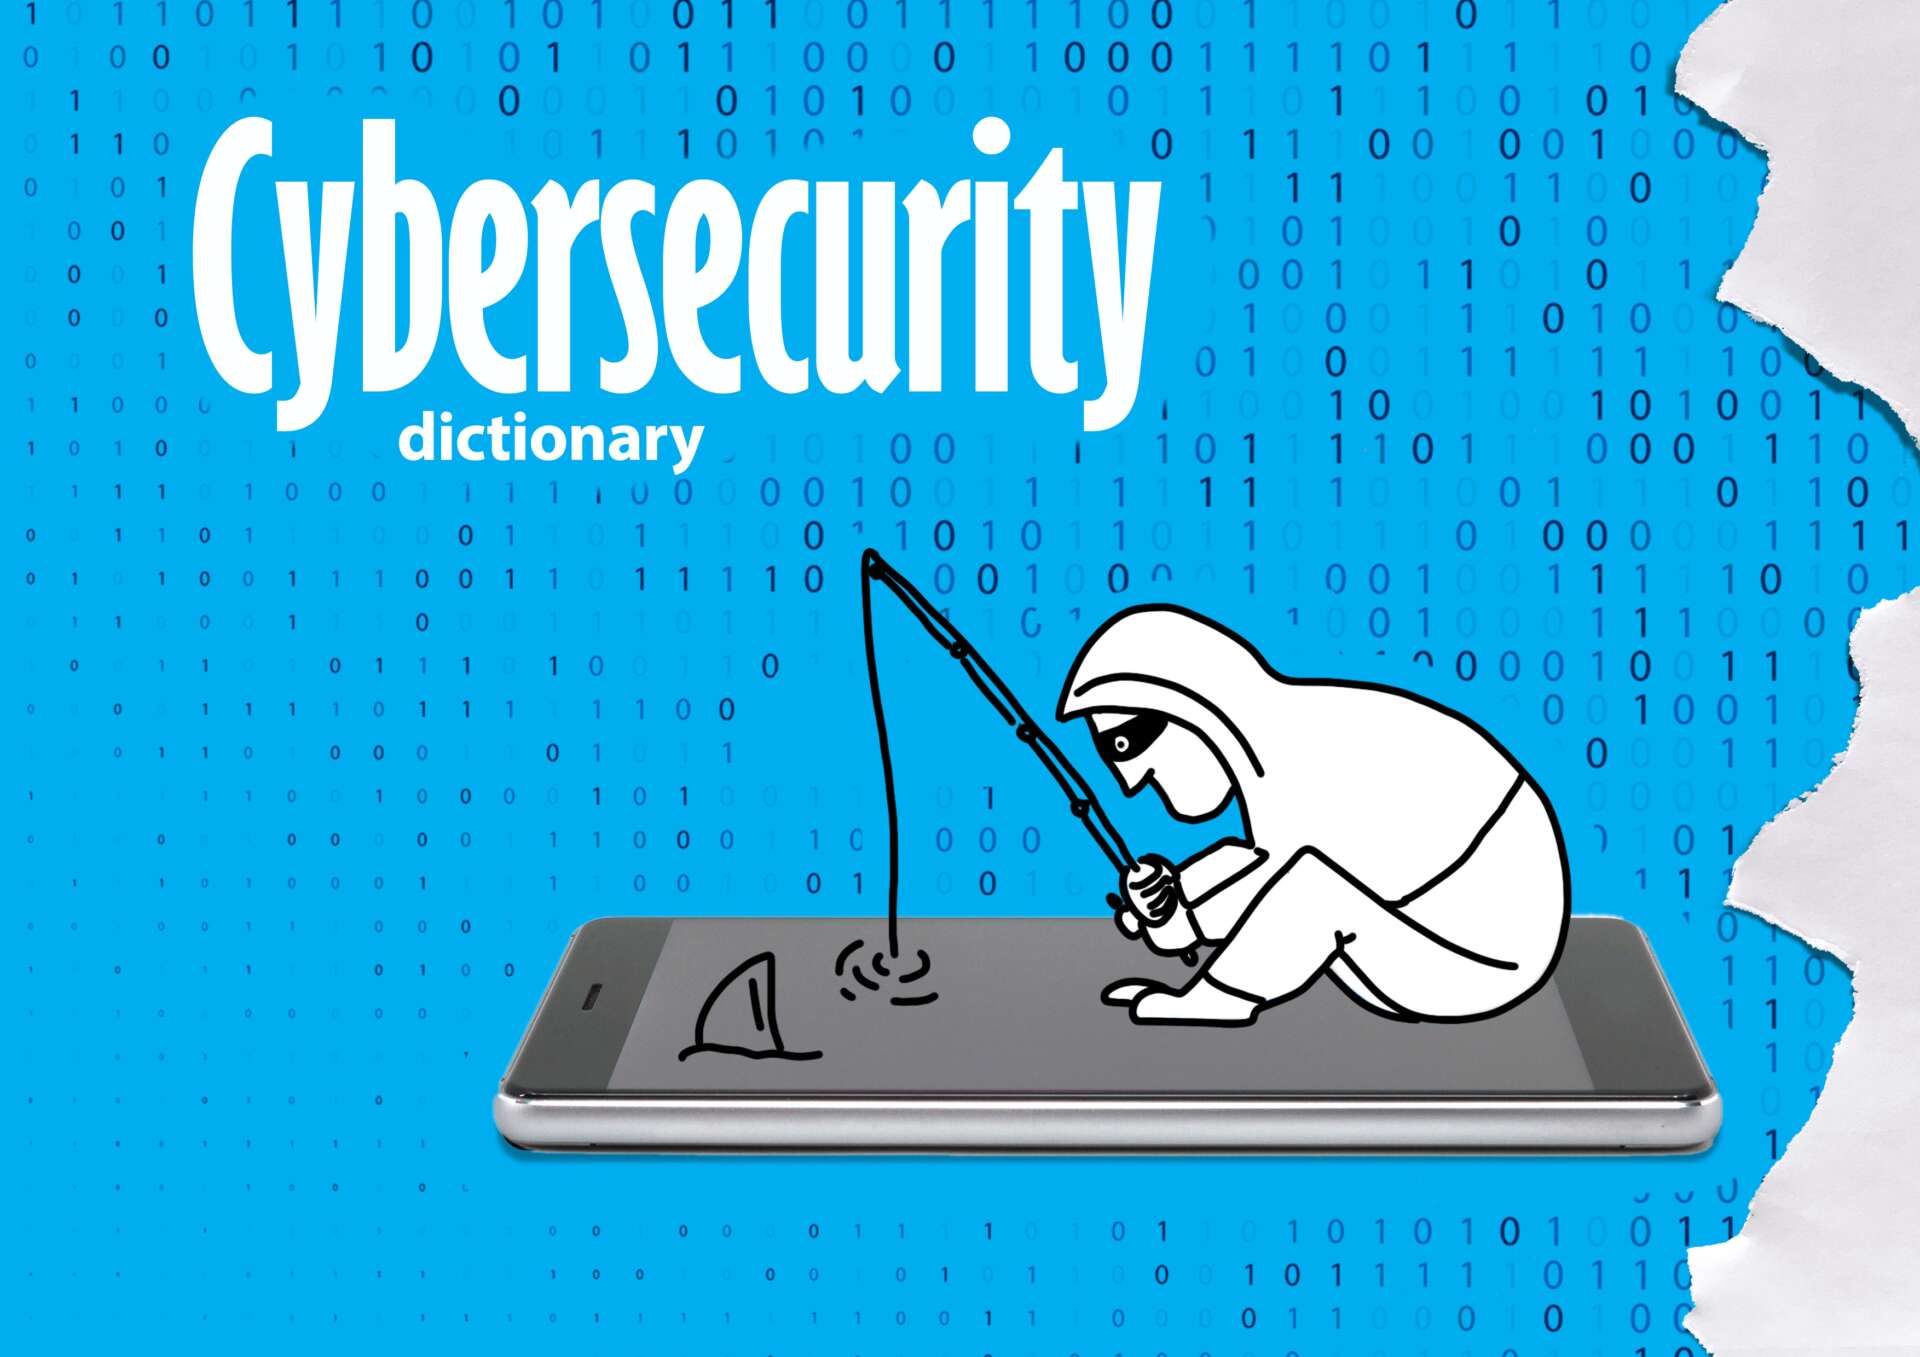 Cyber security dictionary